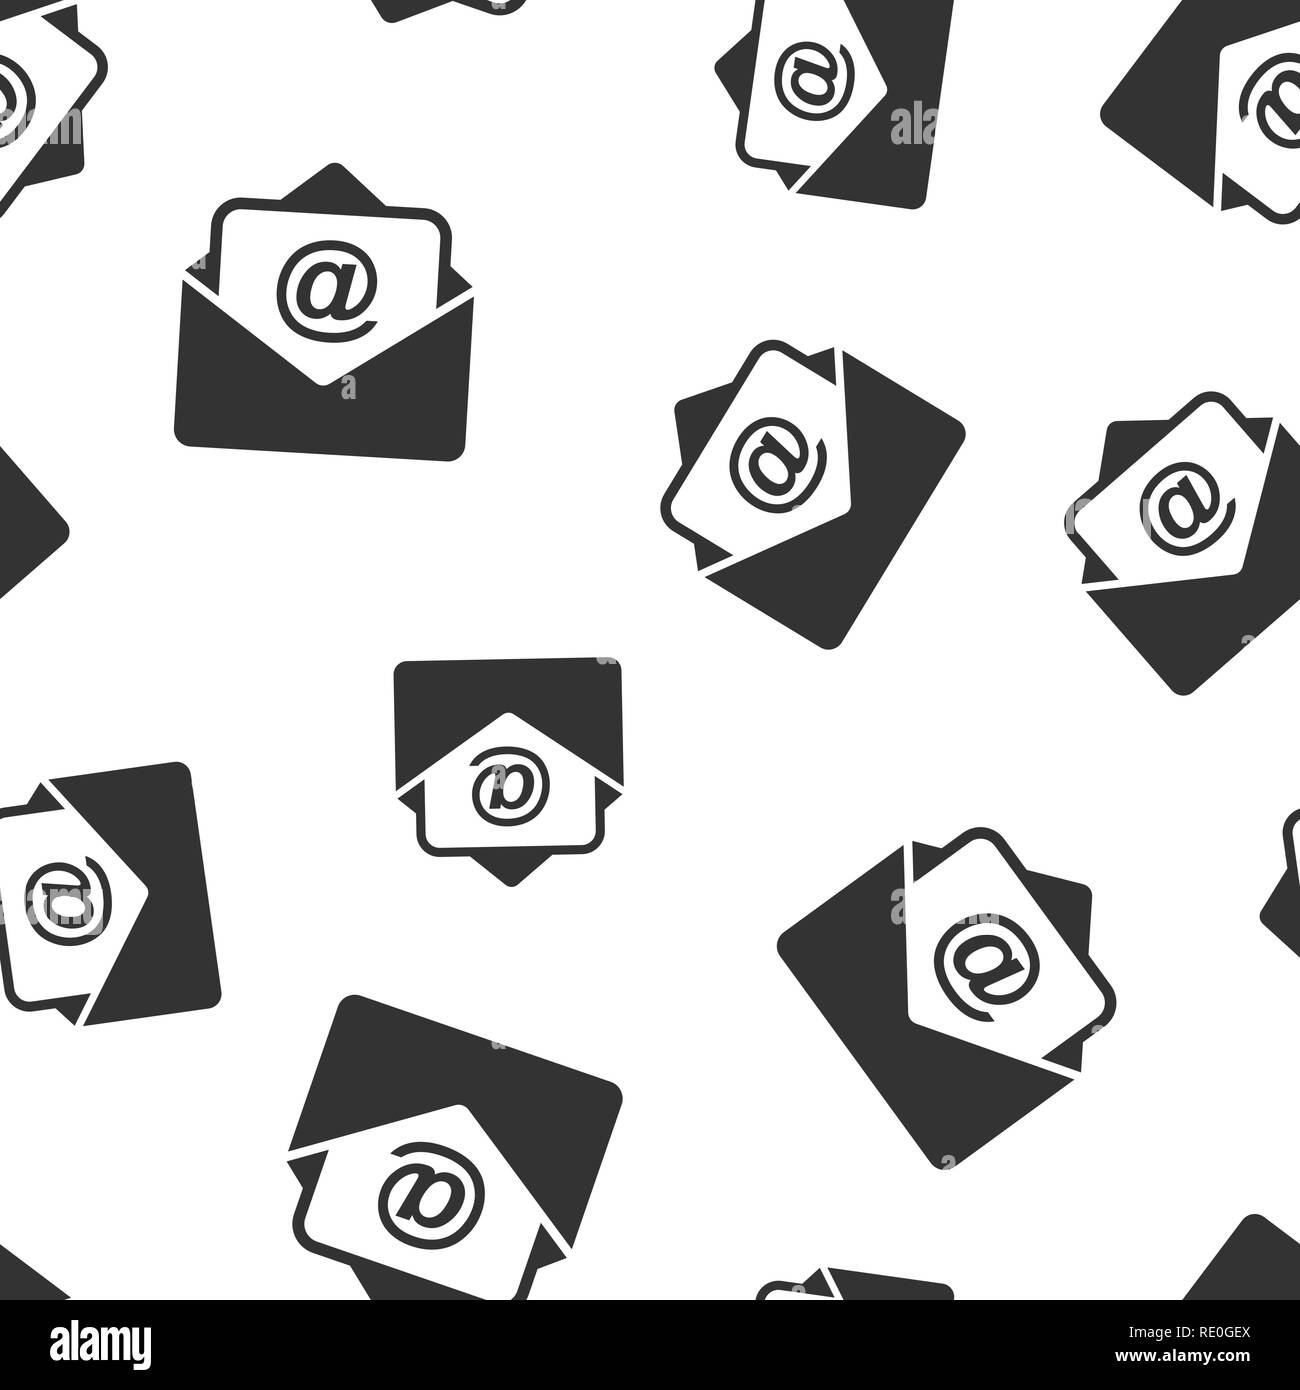 Mail envelope icon seamless pattern background. Email message vector illustration. Mailbox e-mail symbol pattern. Stock Vector